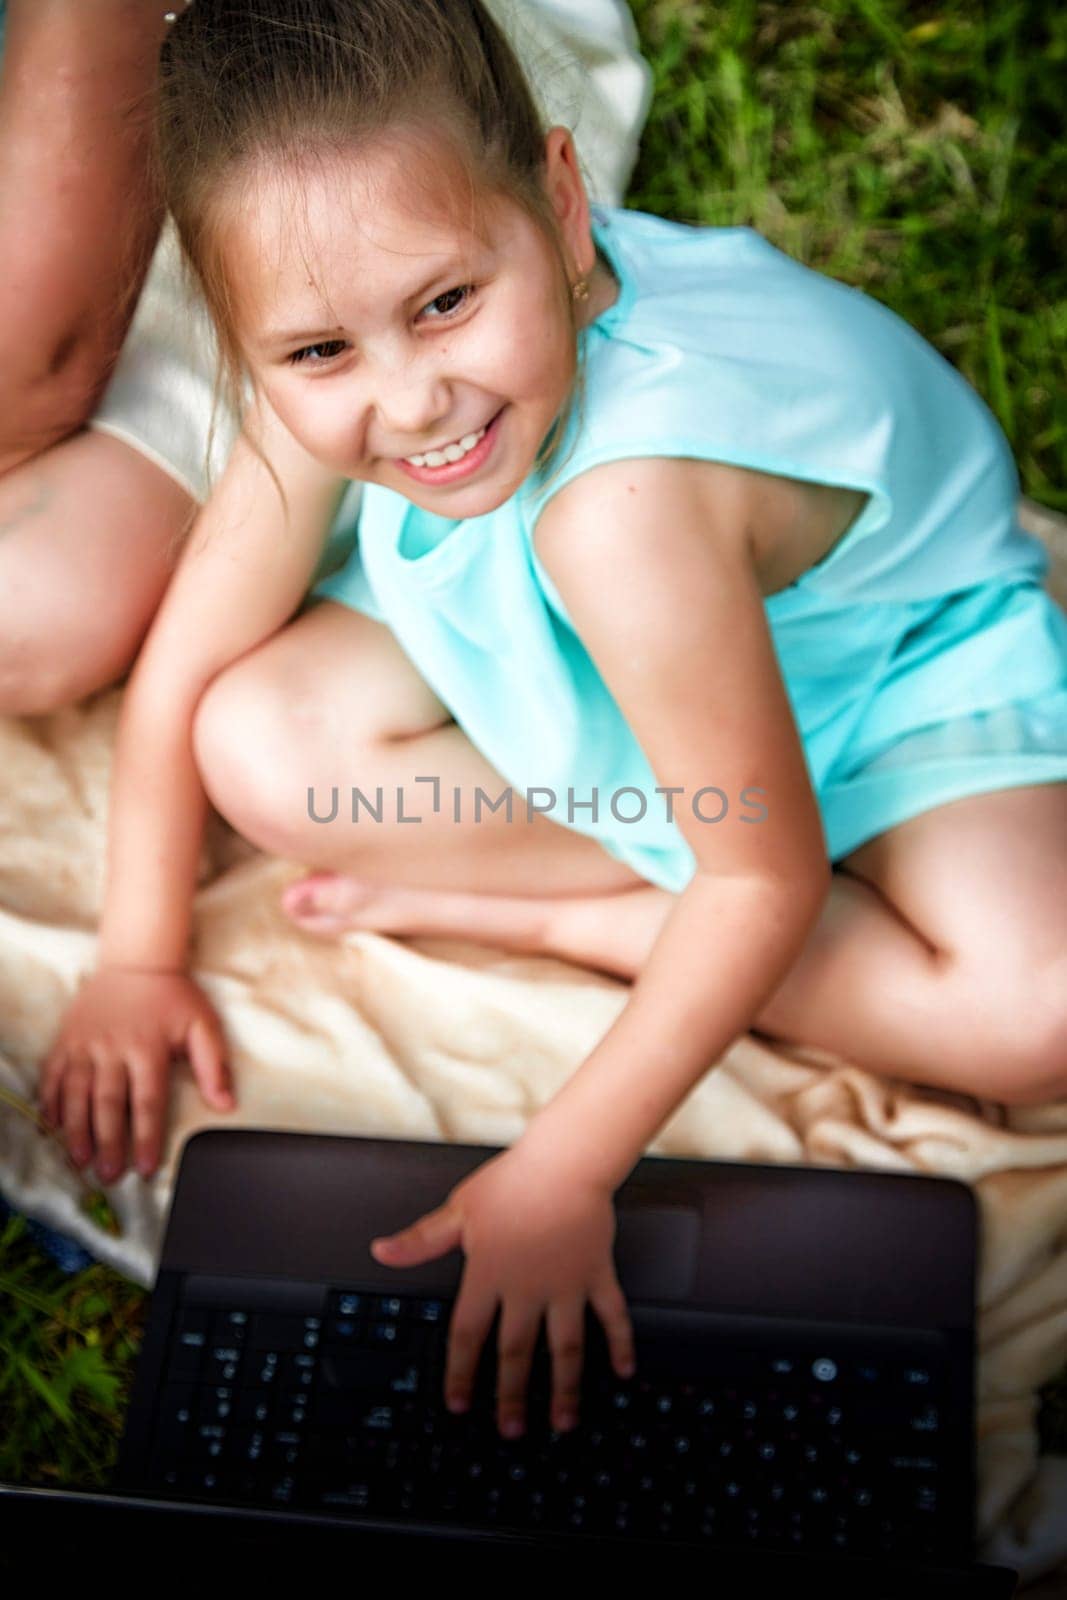 Pretty little funny girl with a laptop on the grass in nature